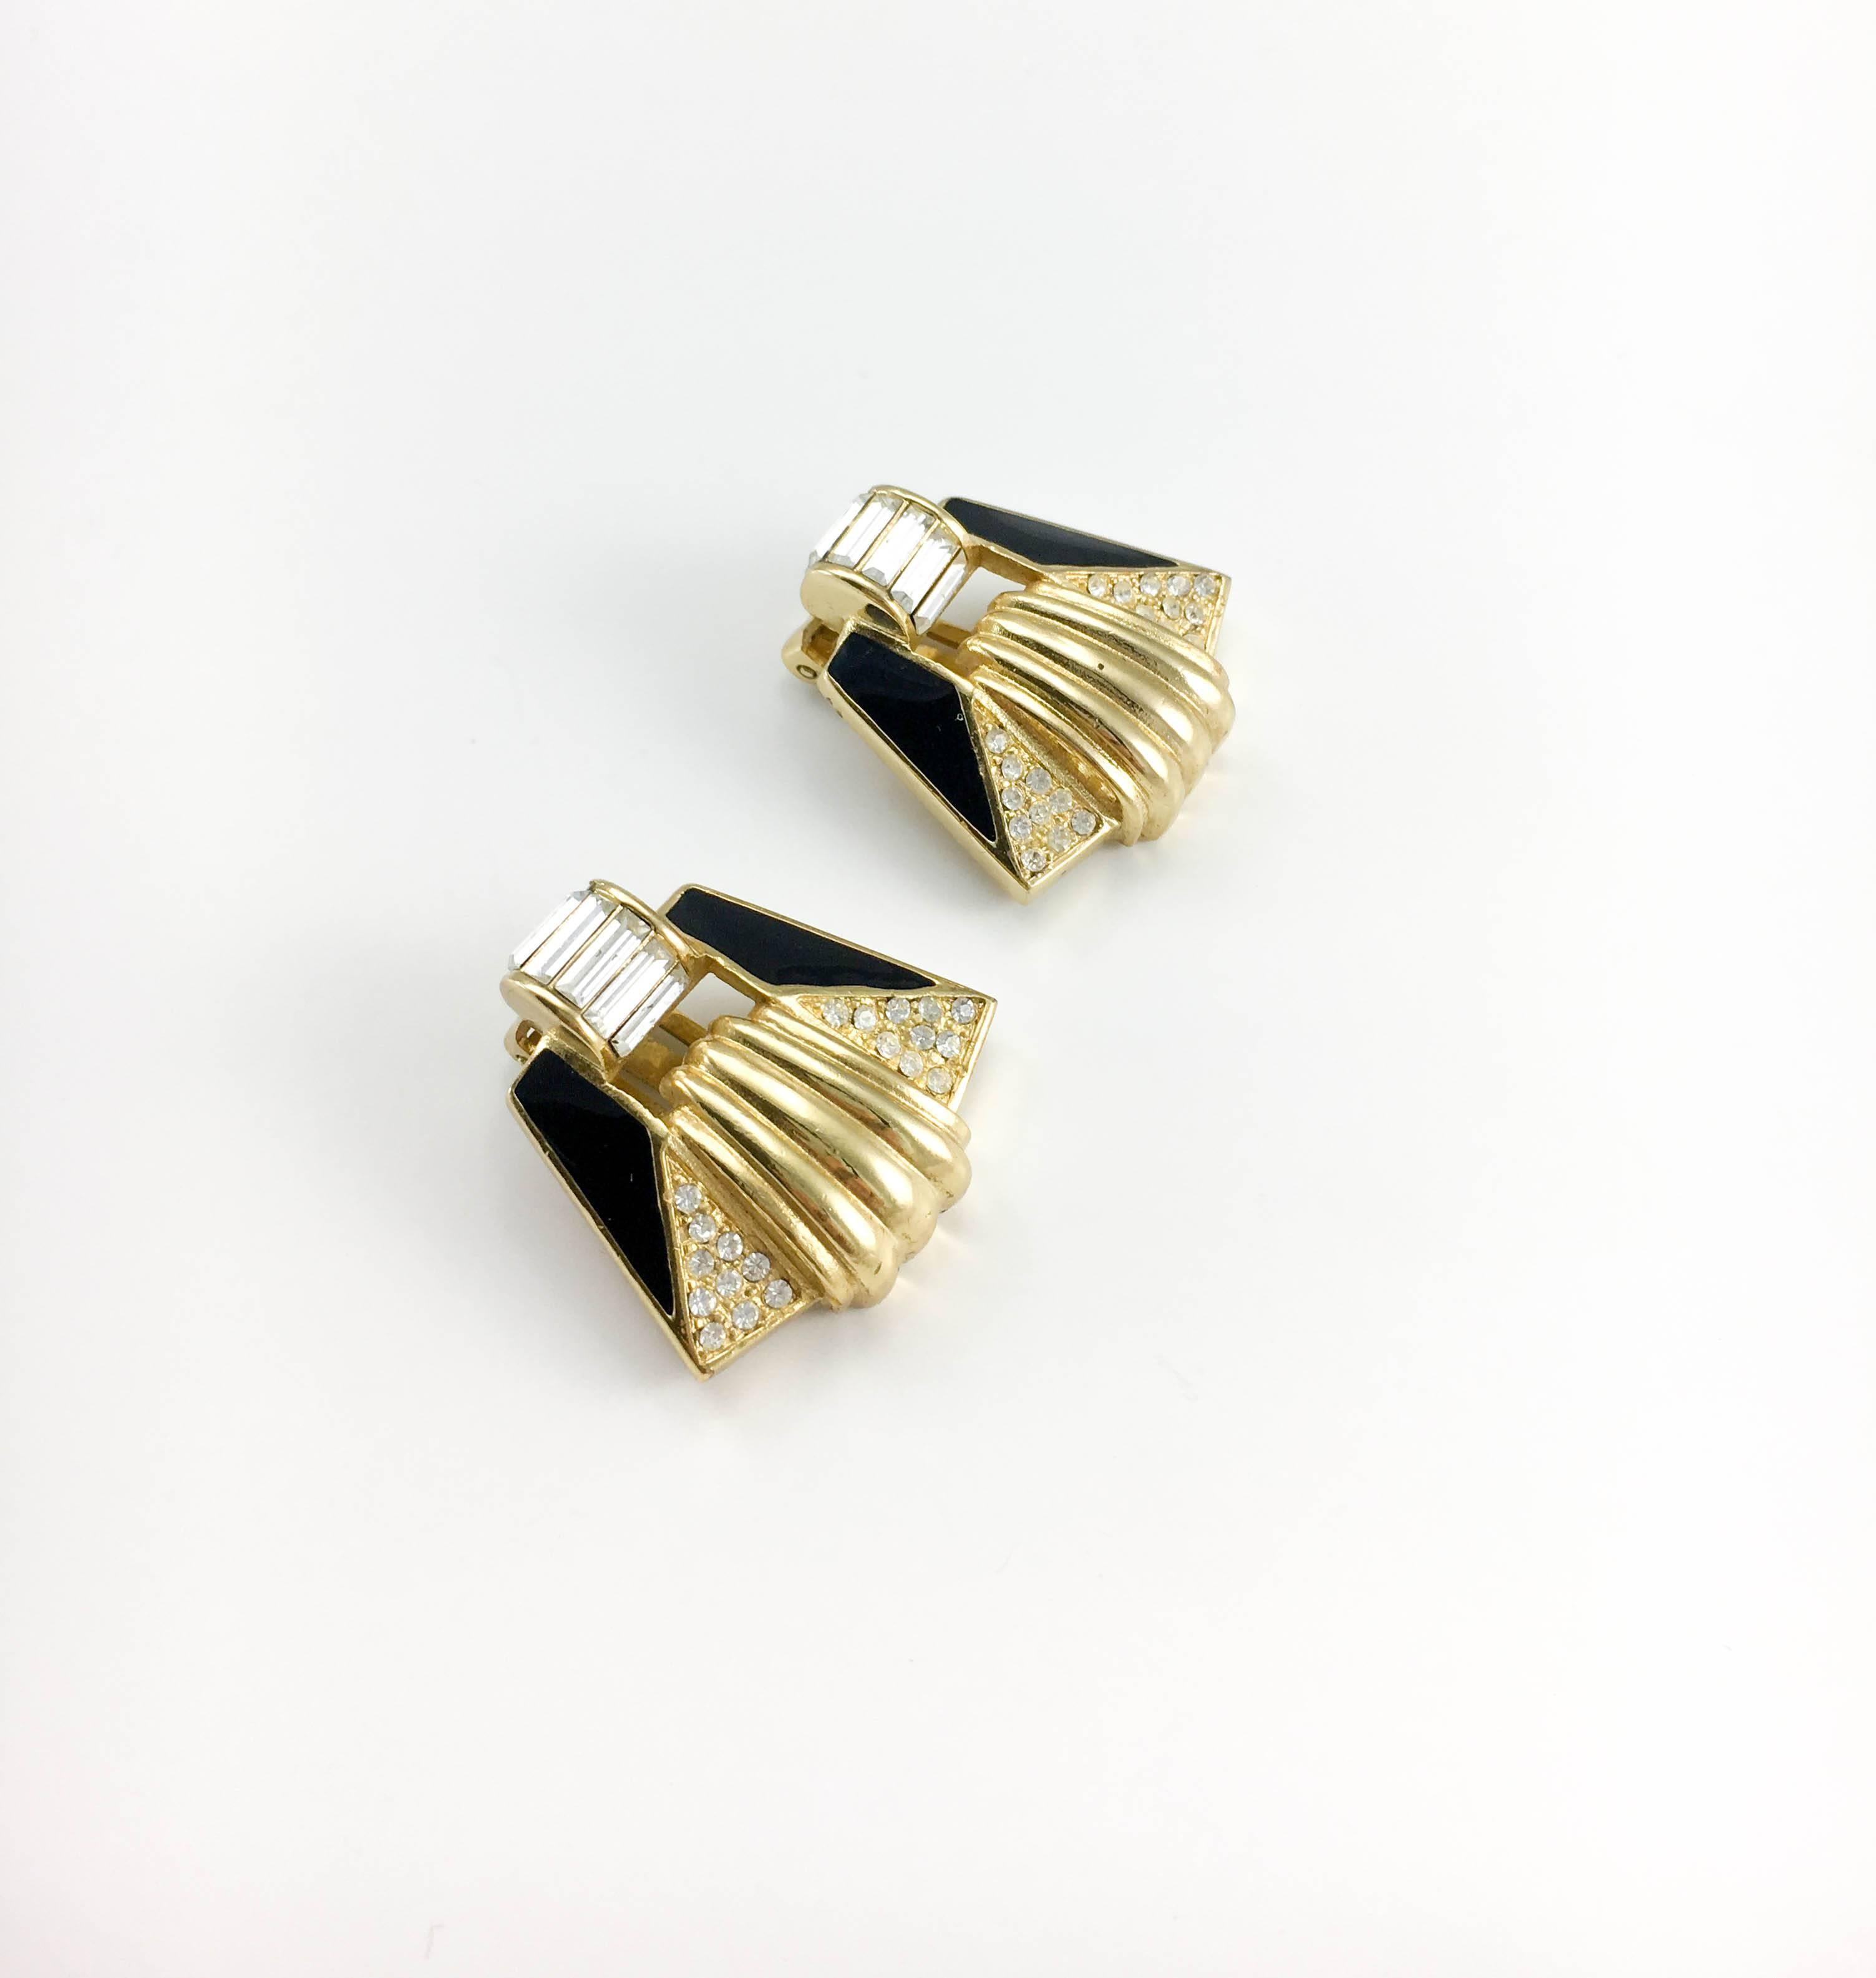 Striking Vintage Christian Dior Geometrical Clip-On Earrings. These fabulous 1980’s earrings by Dior are Art Deco-inspired. Gold-Plated, they feature geometric designs embellished with paste (rhinestone) and black enamel, as well as baguette-shaped